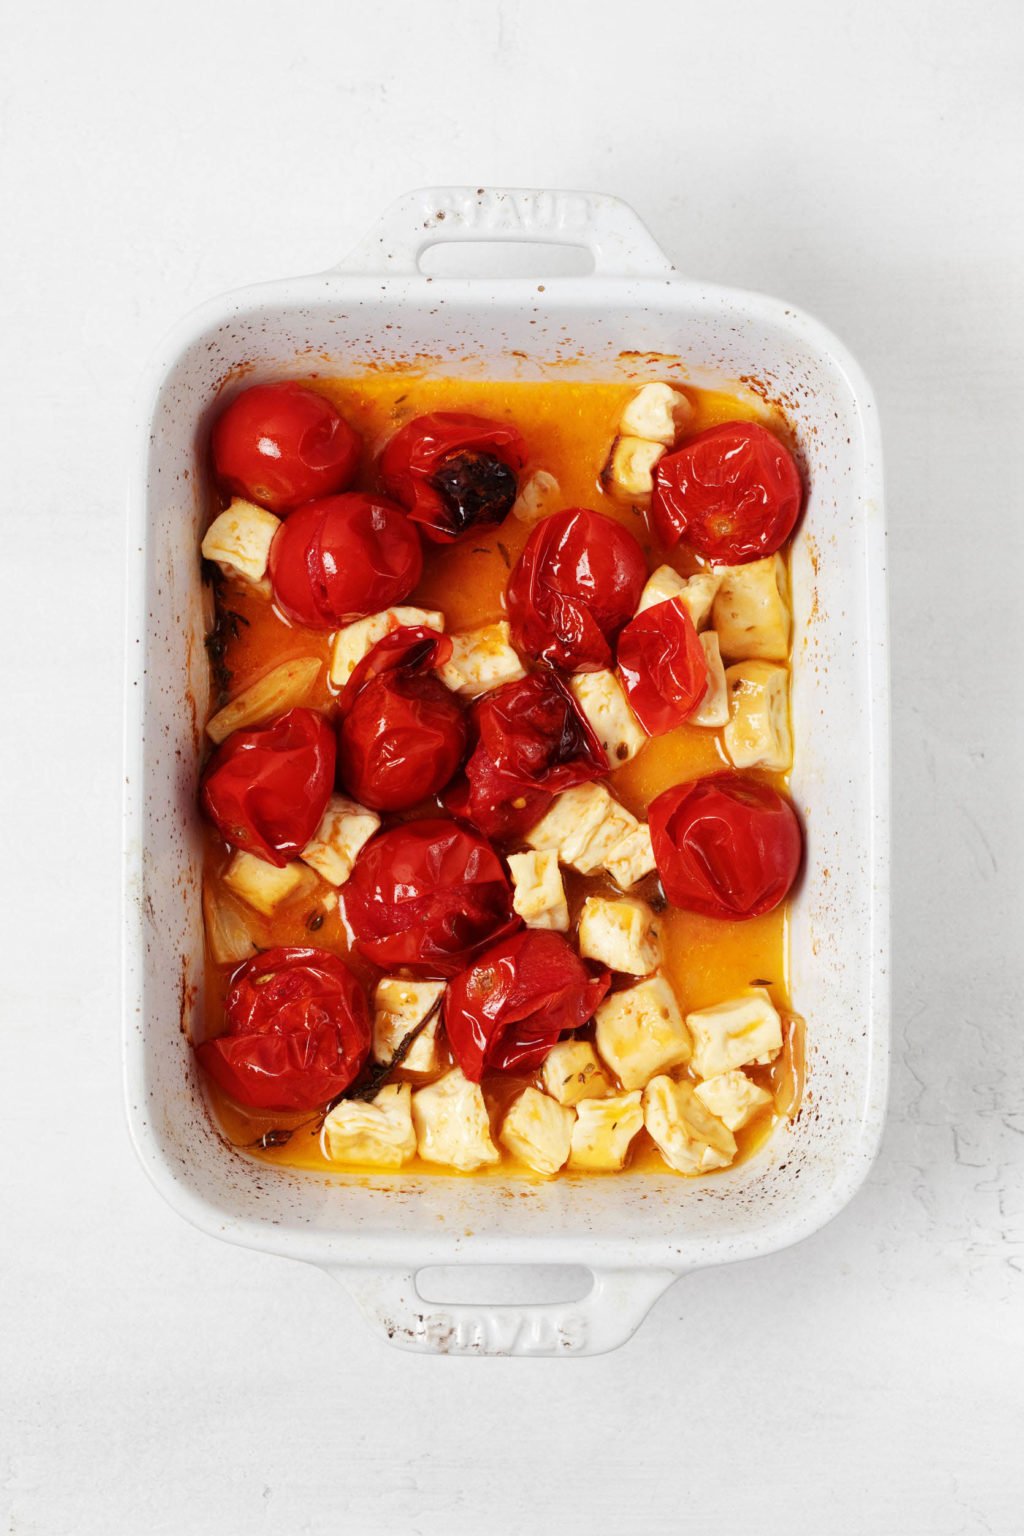 Tomatoes and tofu have been baked in a rectangular, white dish.